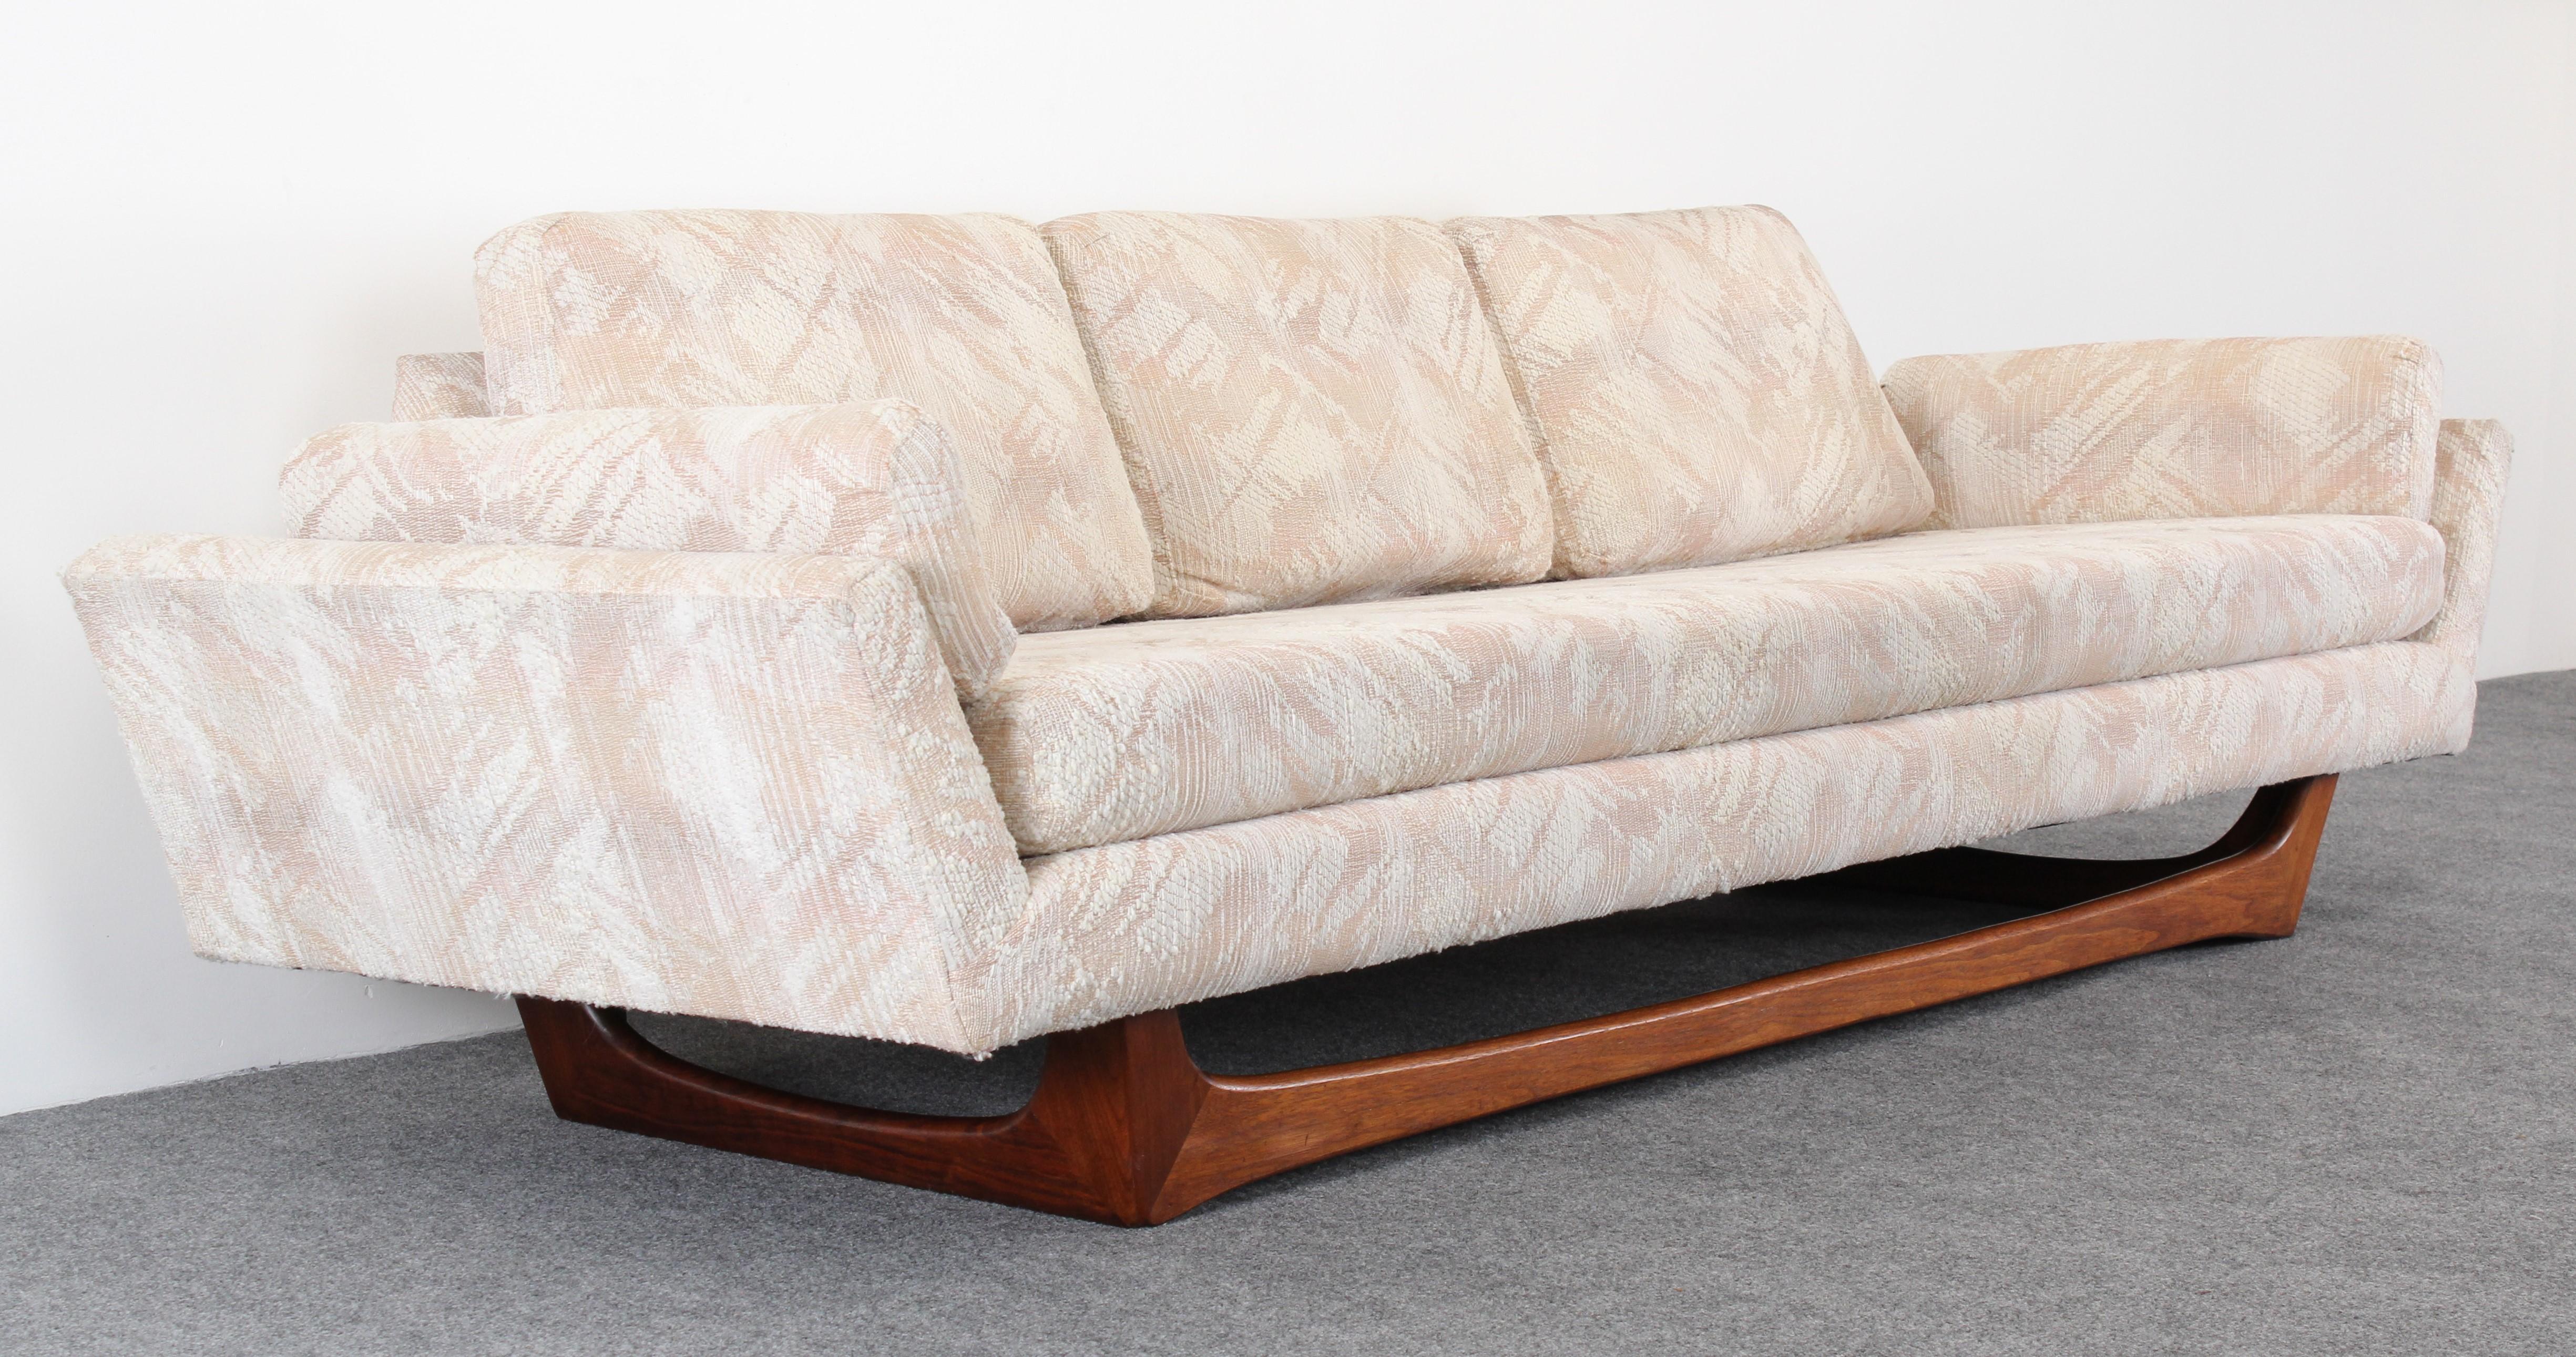 An unusual rare model Mid-Century Modern Adrian Pearsall sofa for Craft Associates, Inc., 1960s. This sofa has simplistic modern lines and a sculptural walnut base. New upholstery recommended. 

Dimensions: 29